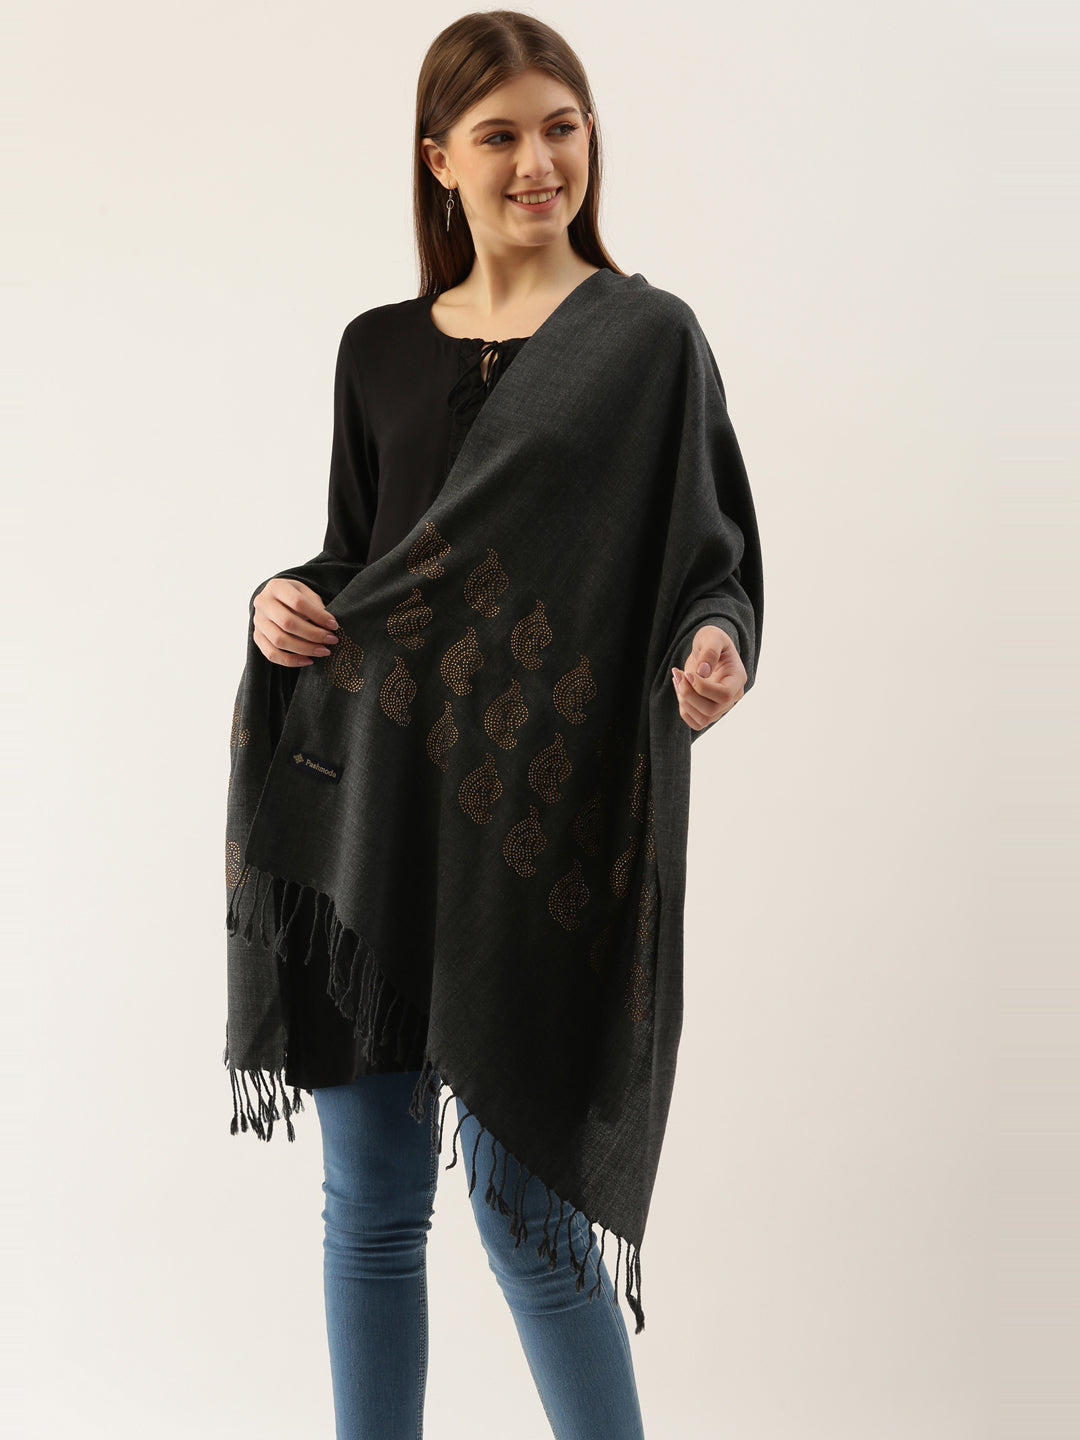 Women’s Grey Crystal Embellished Solid Stole (28x80 Inches)